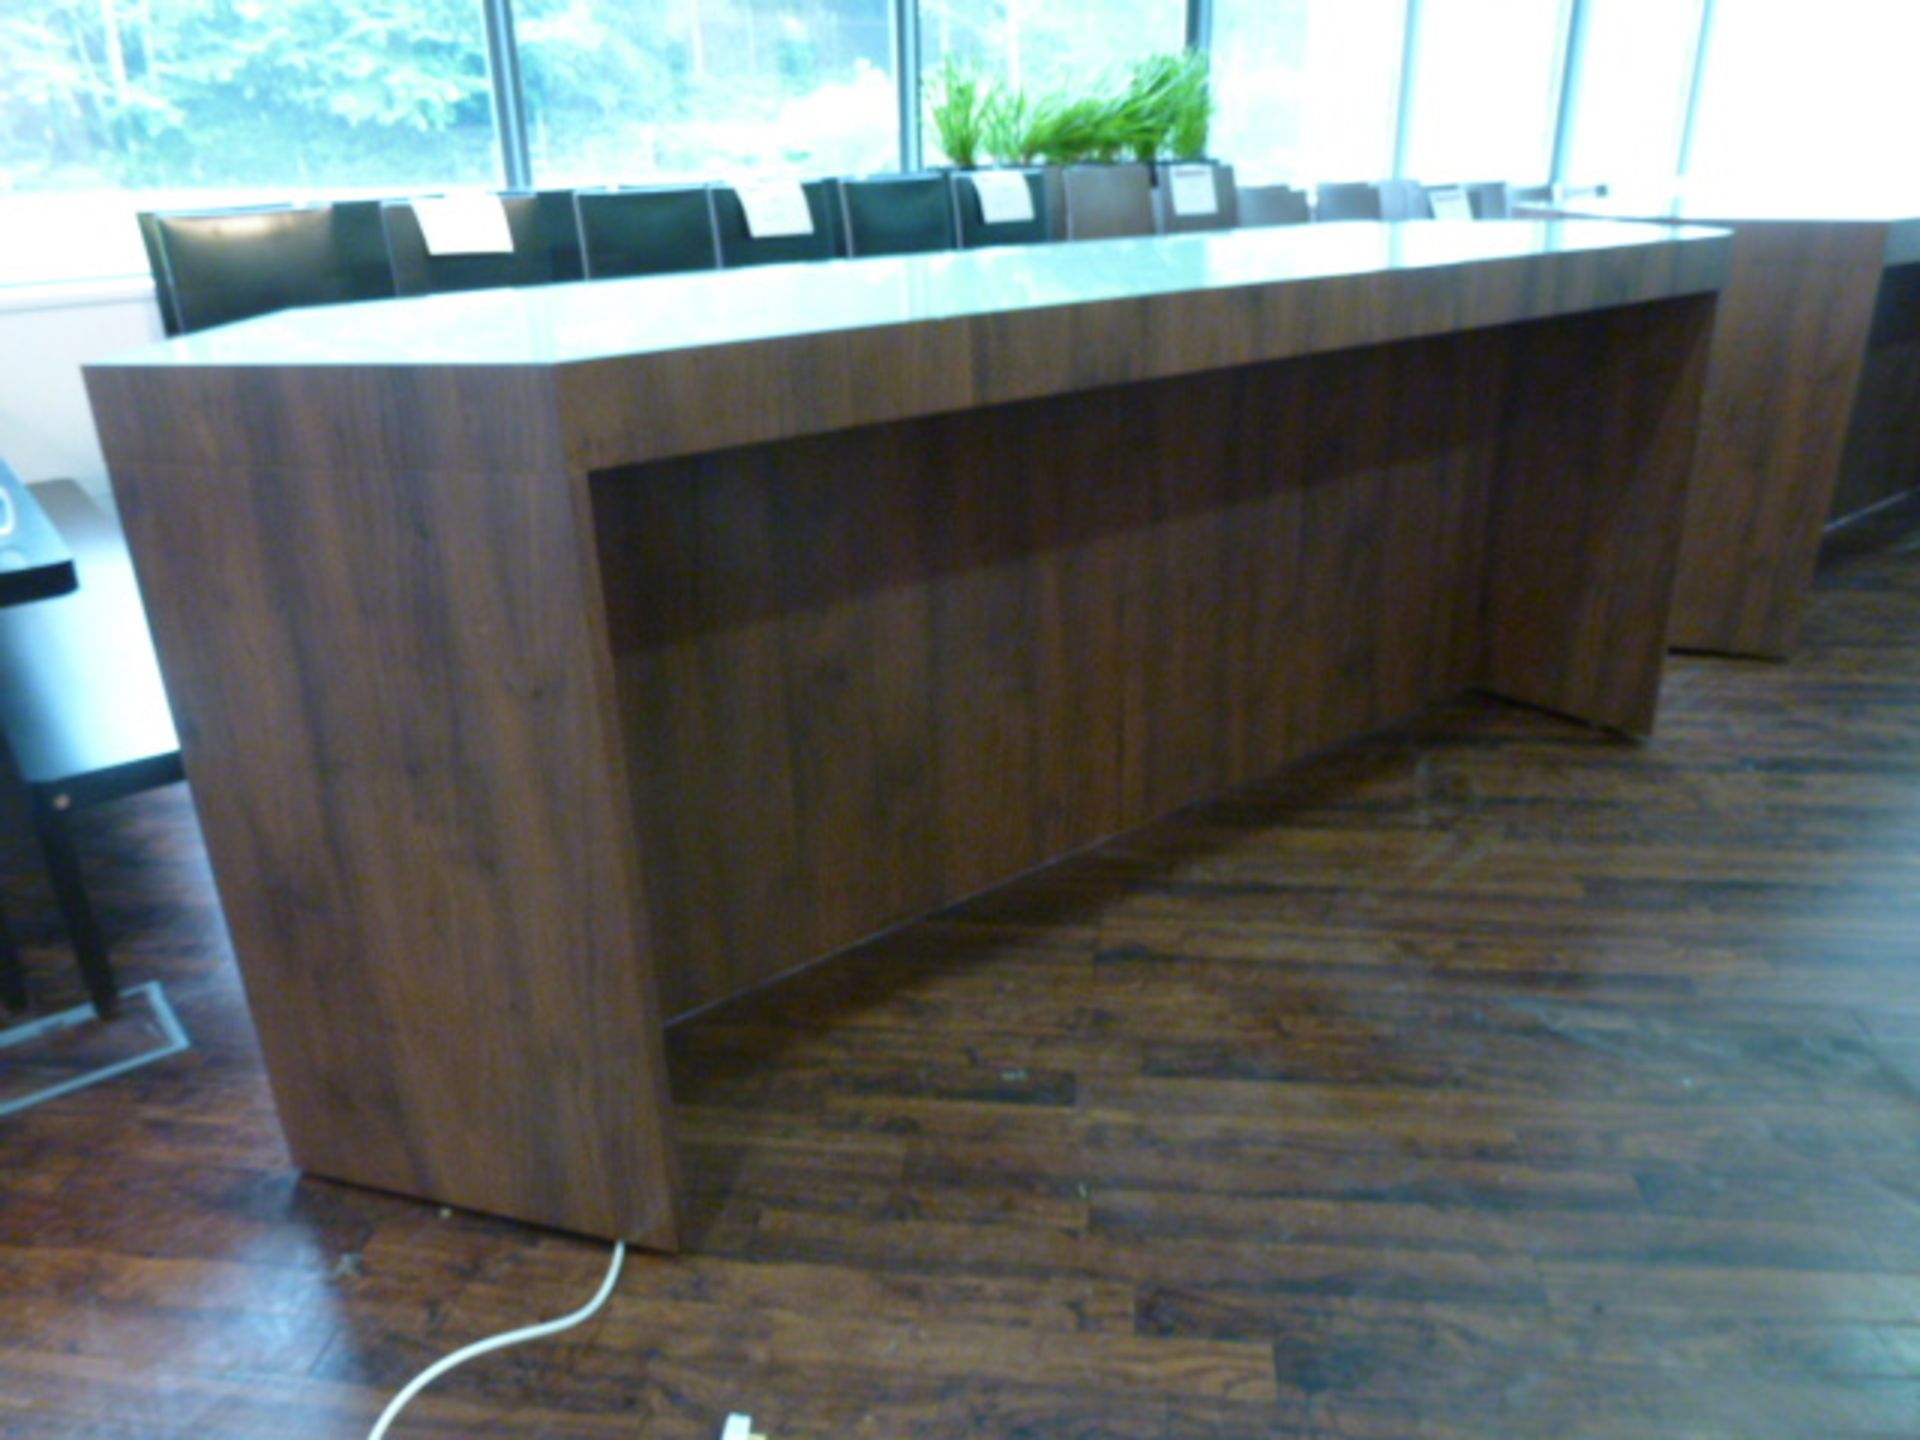 Bespoke Canteen Illuminated Glass Topped Counter Unit. Size L290cm x W90cm x H103cm. - Image 4 of 4